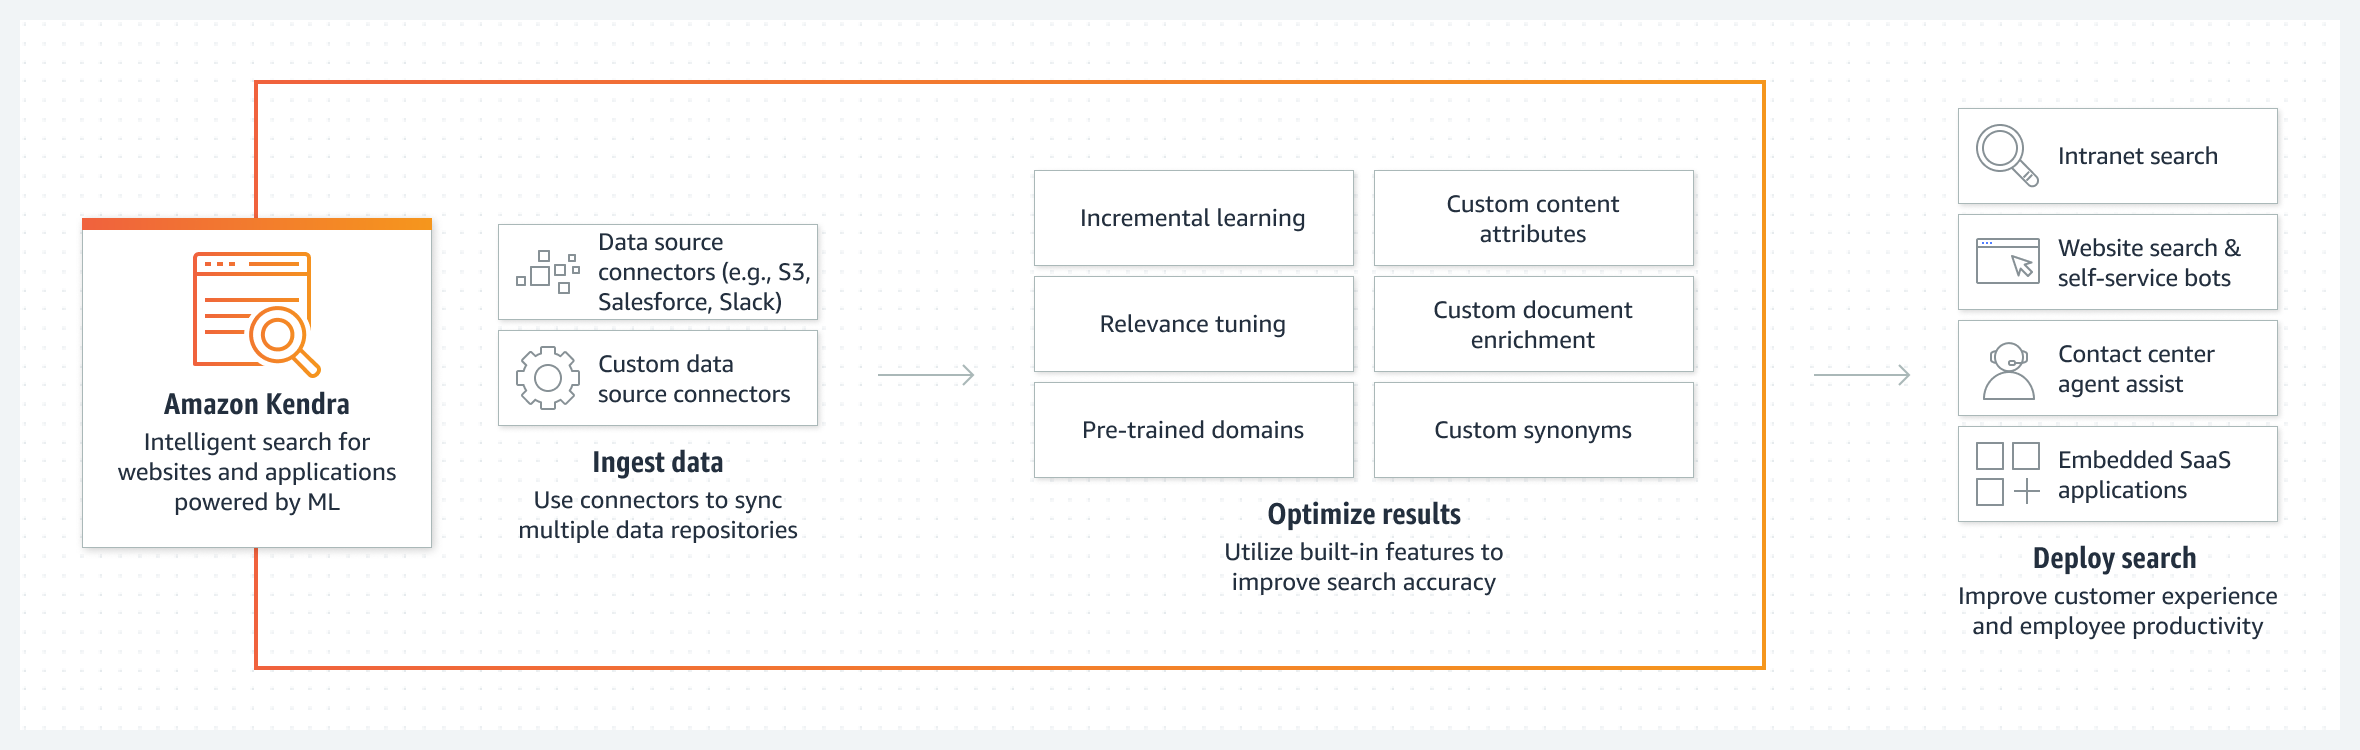 Diagram showing how Amazon Kendra ingests data from data sources to improve search accuracy, customer experiences, and employee productivity.